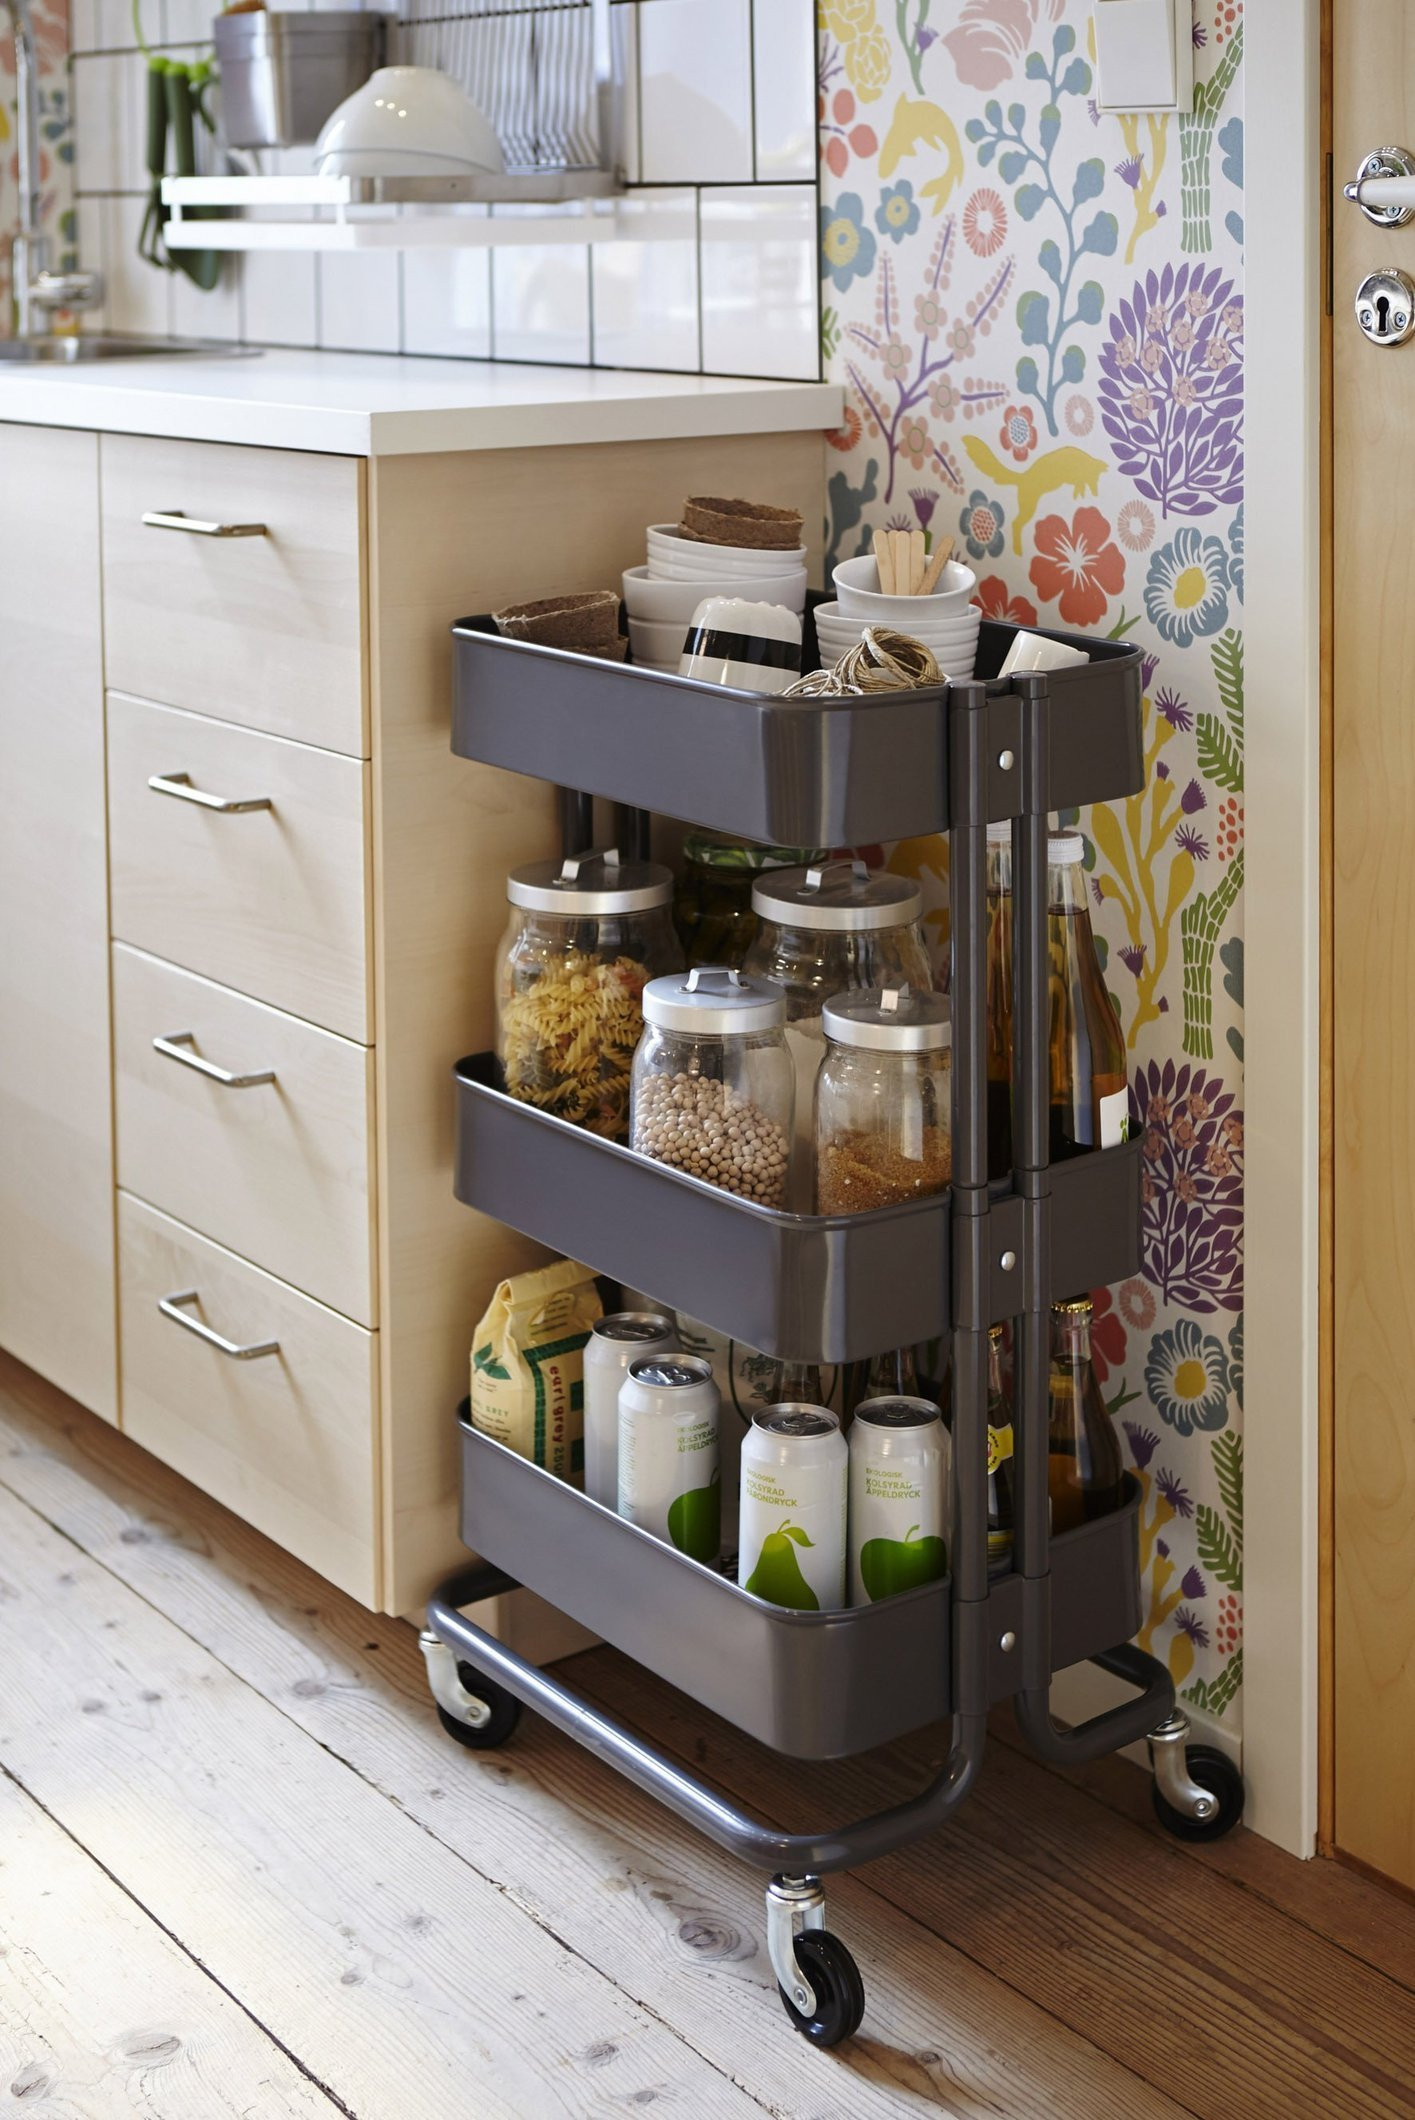 Ikea Kitchen Storage
 6 Clever IKEA Storage Solutions for Your Kitchen Basic